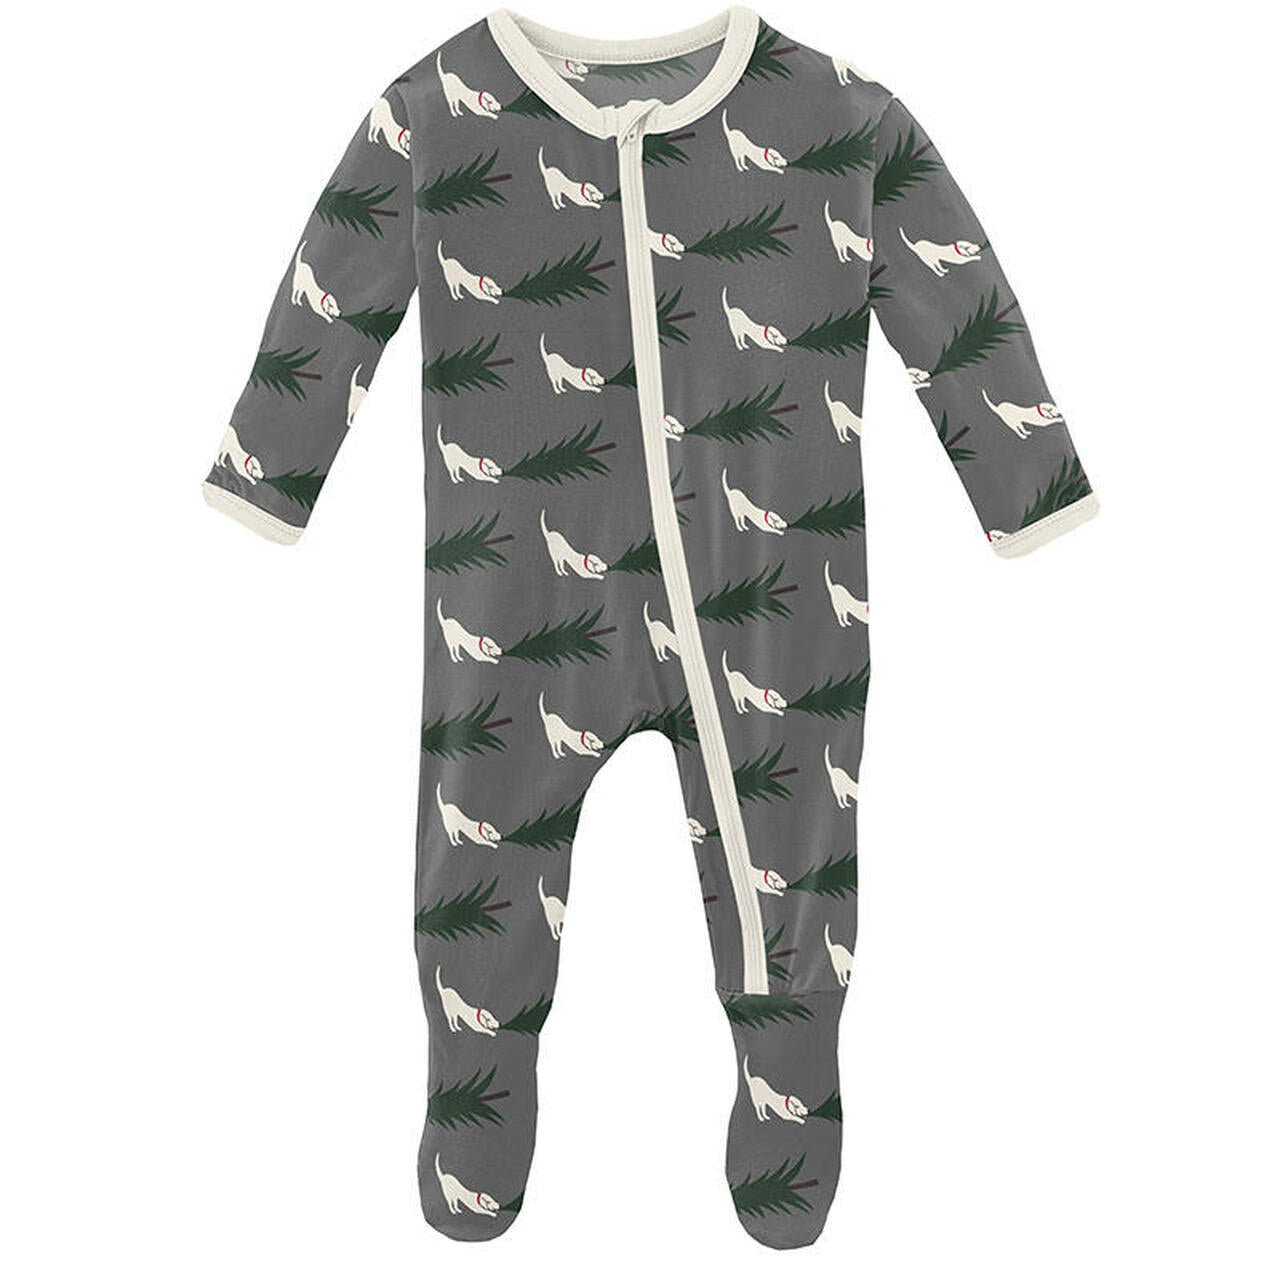 Boy's Print Footie with Zipper - Pewter Christmas Tree Drag - KicKee Pants-I Footie-Graceful & Chic Boutique, Family Clothing Store in Waxahachie, Texas